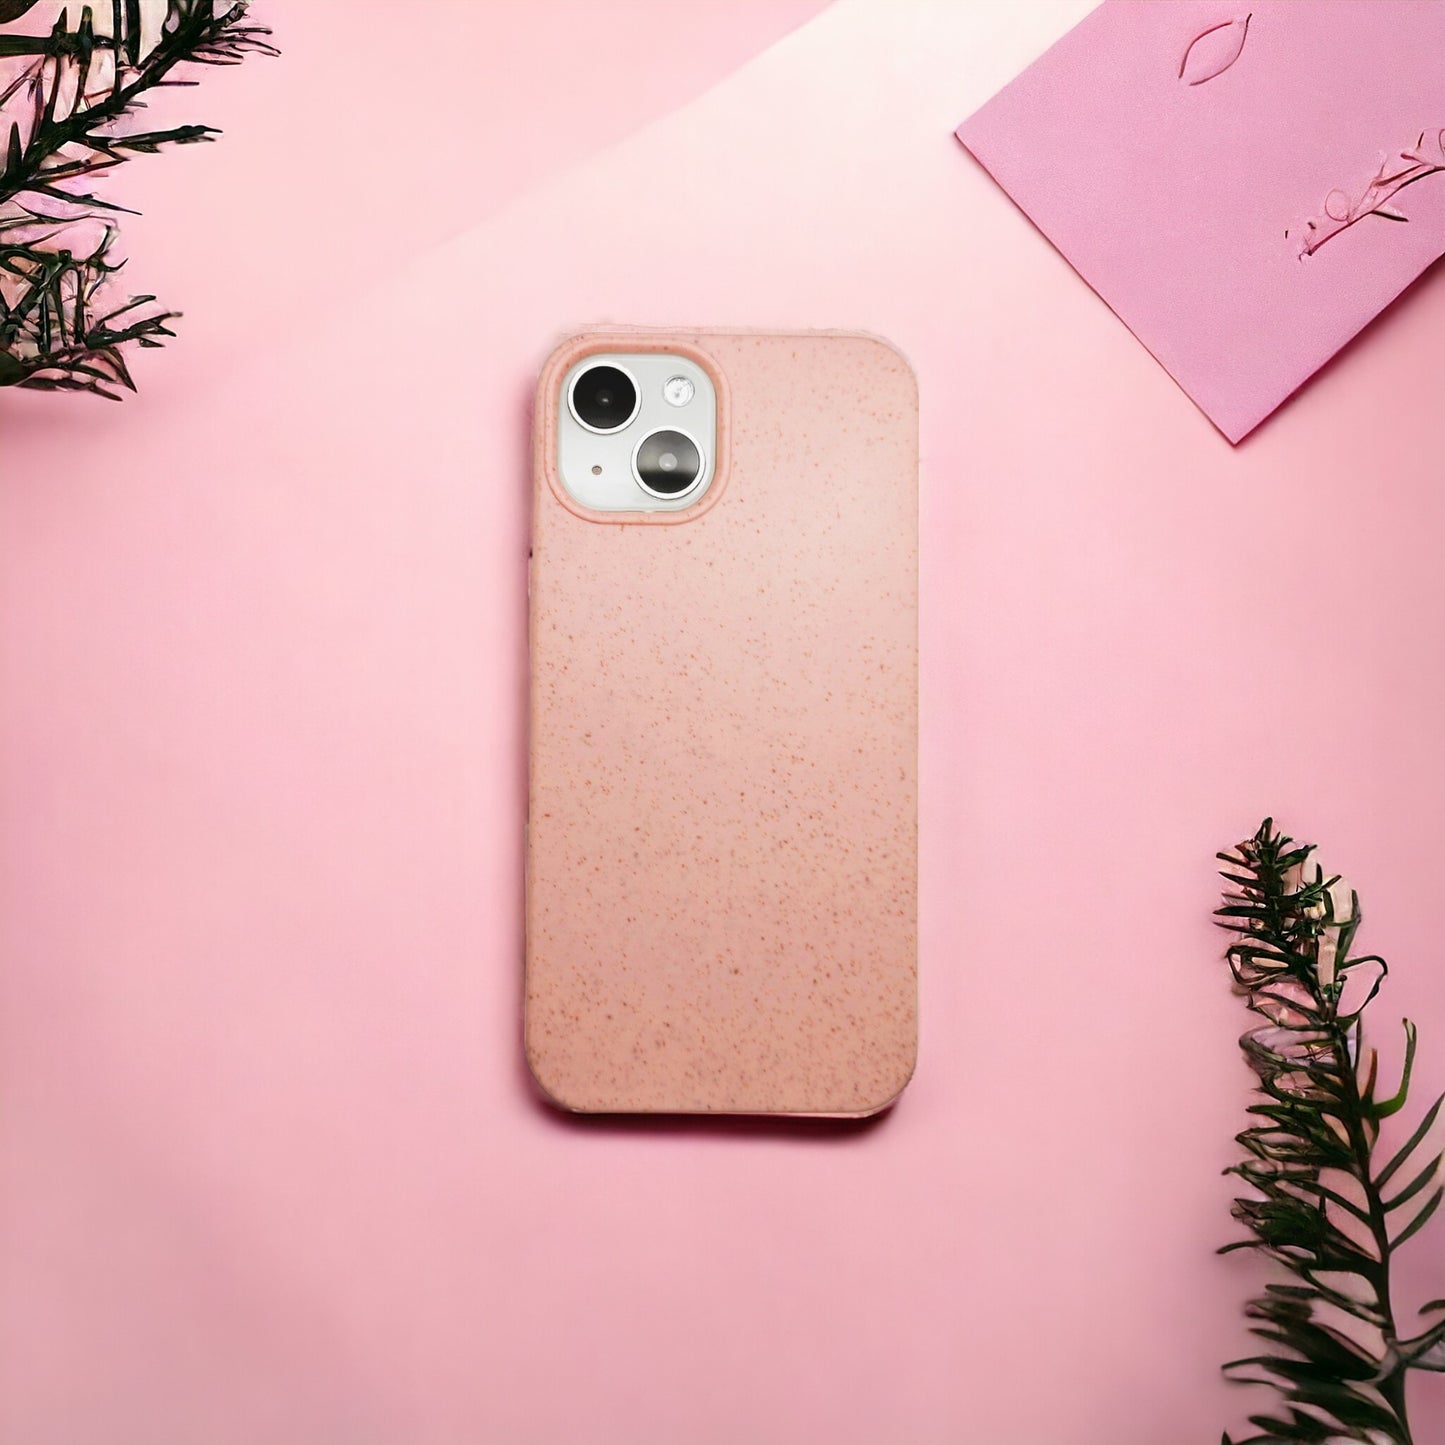 Compostable iPhone Case - Pink - Tallpine Cases | Sustainable and Eco-Friendly - Pink Solid color